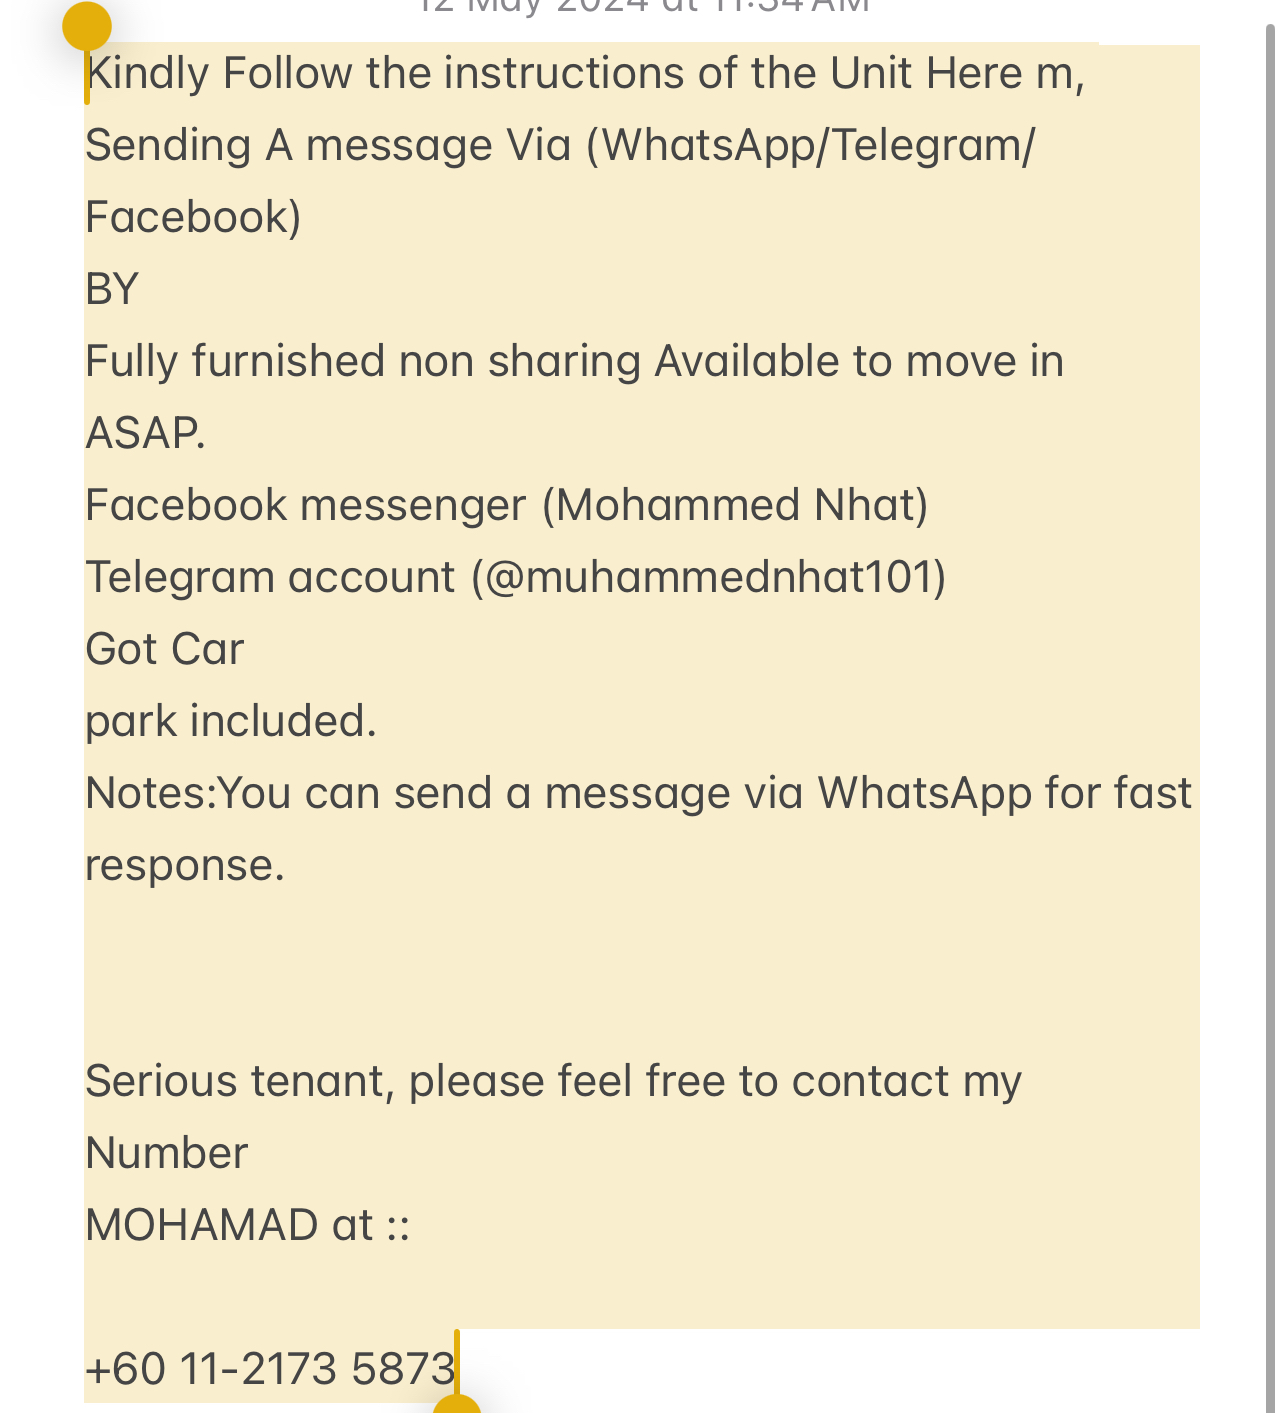 room for rent, single room, shah alam, Send the owner a message on WhatsApp/facebook if you want to RENT the unit facebook (Mohammed Nhat)&Telegram(@muhammednhat101) Fully furnished non sharing :(comfortable)